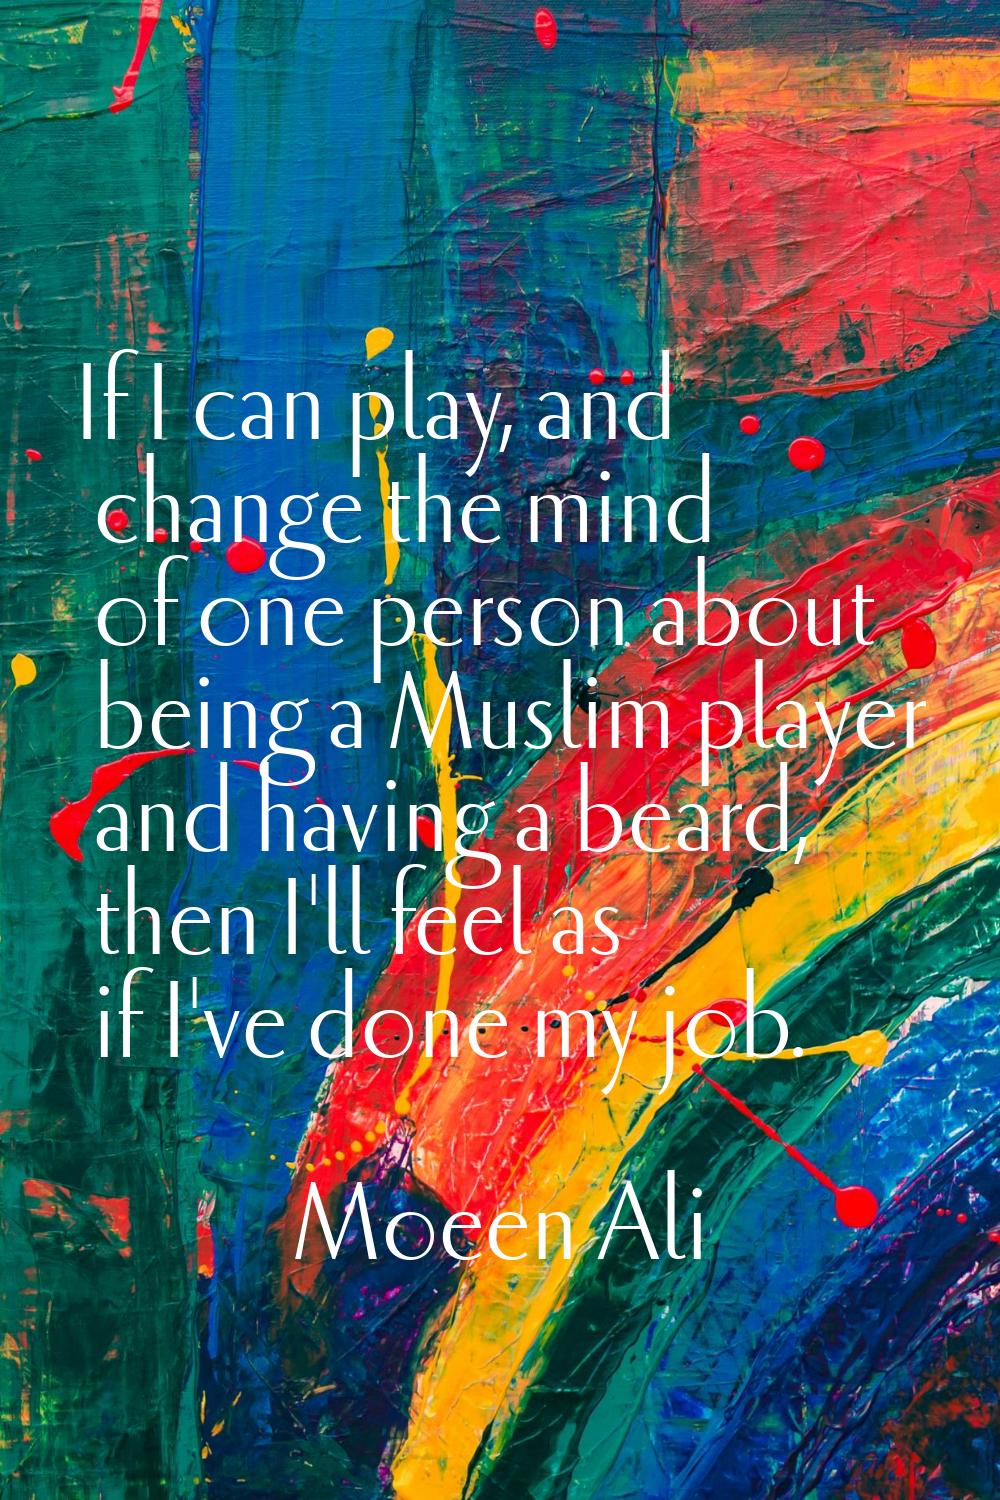 If I can play, and change the mind of one person about being a Muslim player and having a beard, th